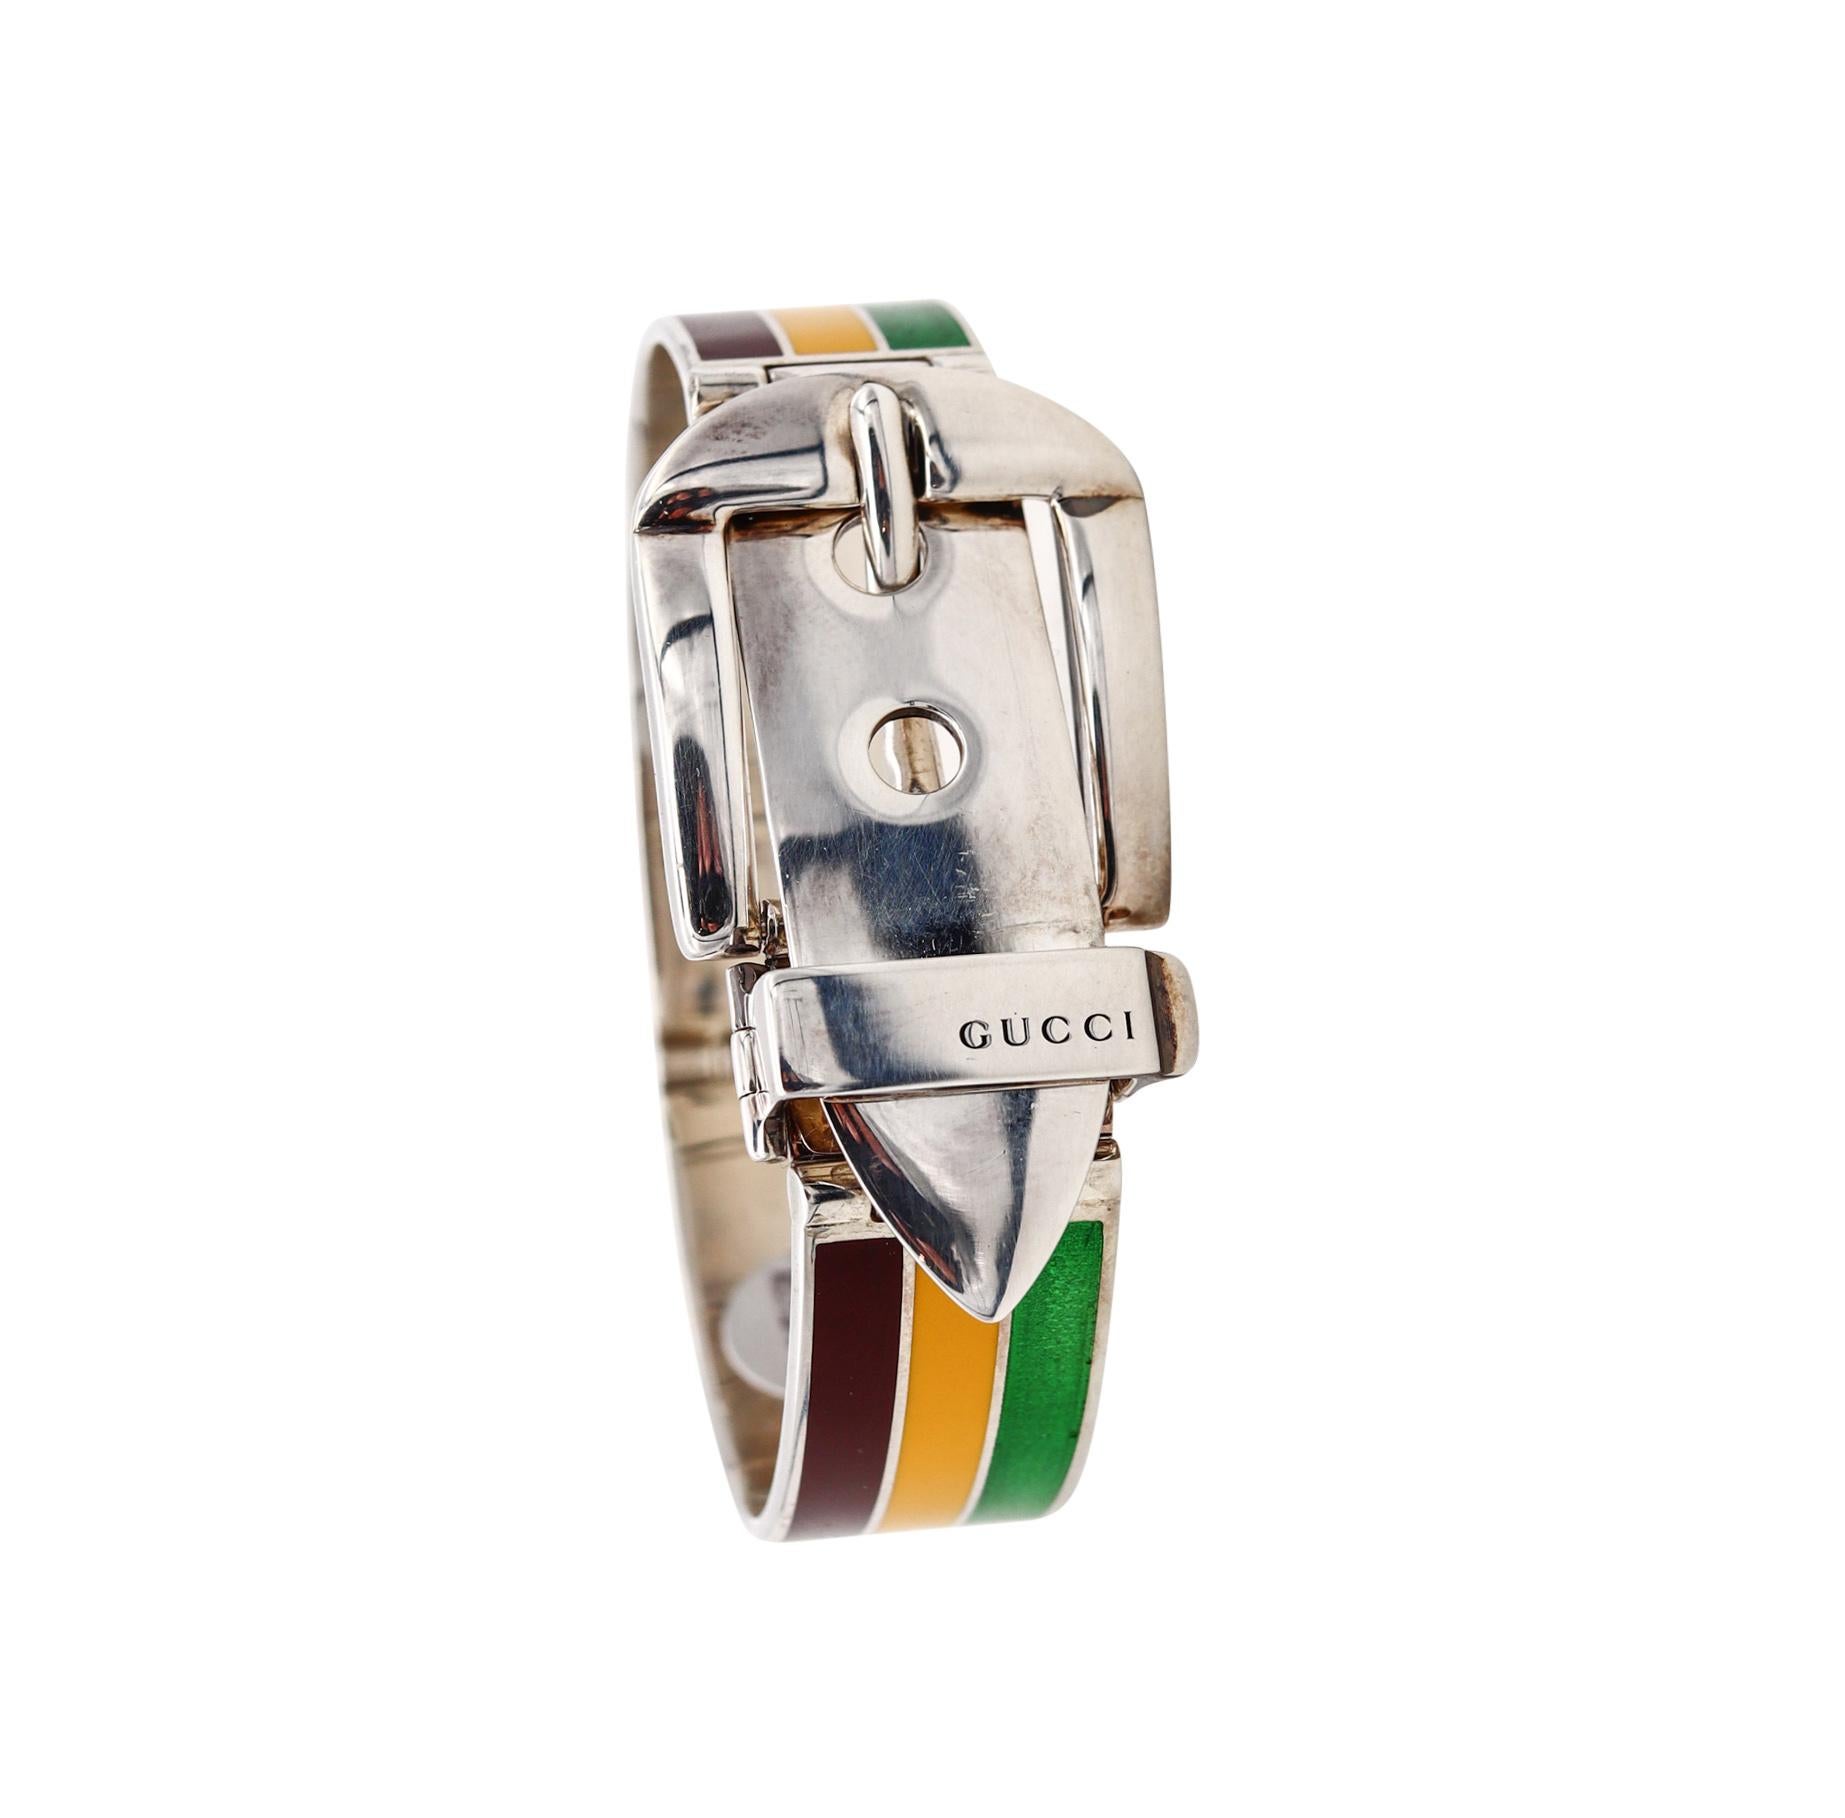 Enameled buckle bracelet designed by Gucci.

Rare vintage buckle bracelet created by the Gucci house in Milano, circa 1970's. This iconic bracelet was crafted in solid .925/,999 sterling silver and is embellished with applications of Green, Brown